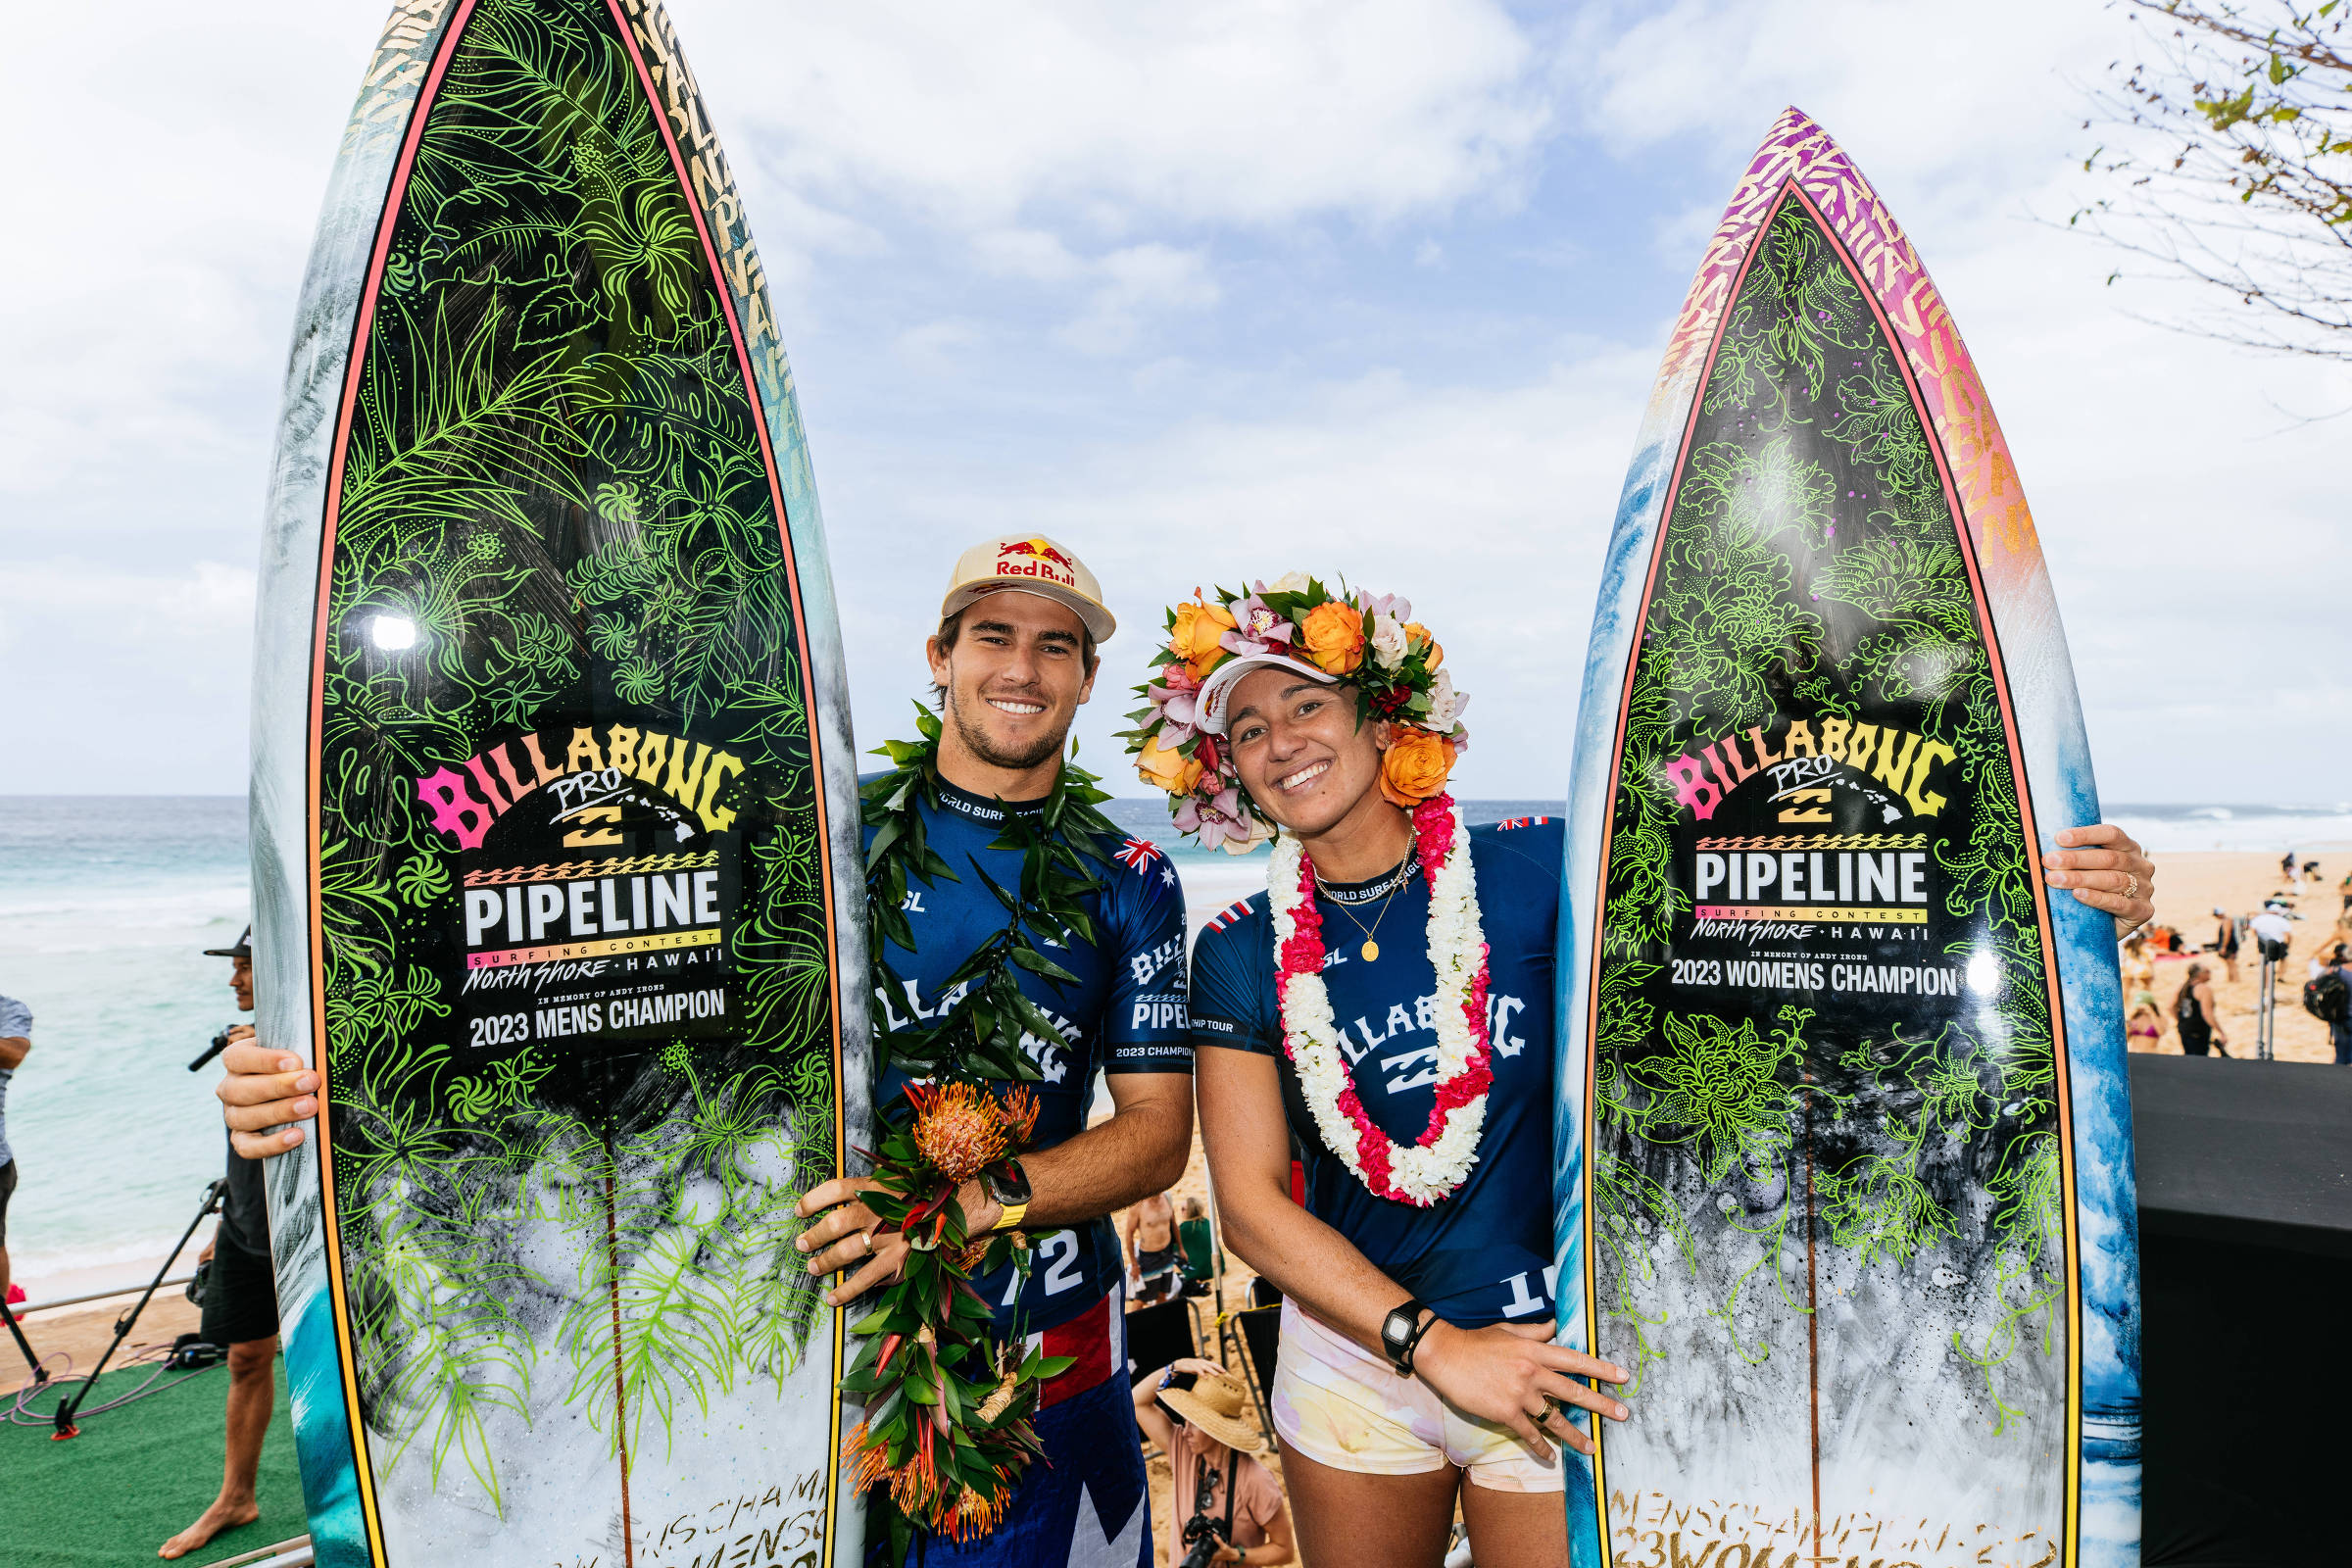 Jack Robinson and Carissa Moore take the Pipeline stage in Hawaii – 02/10/2023 – Na Pinta do Surfe